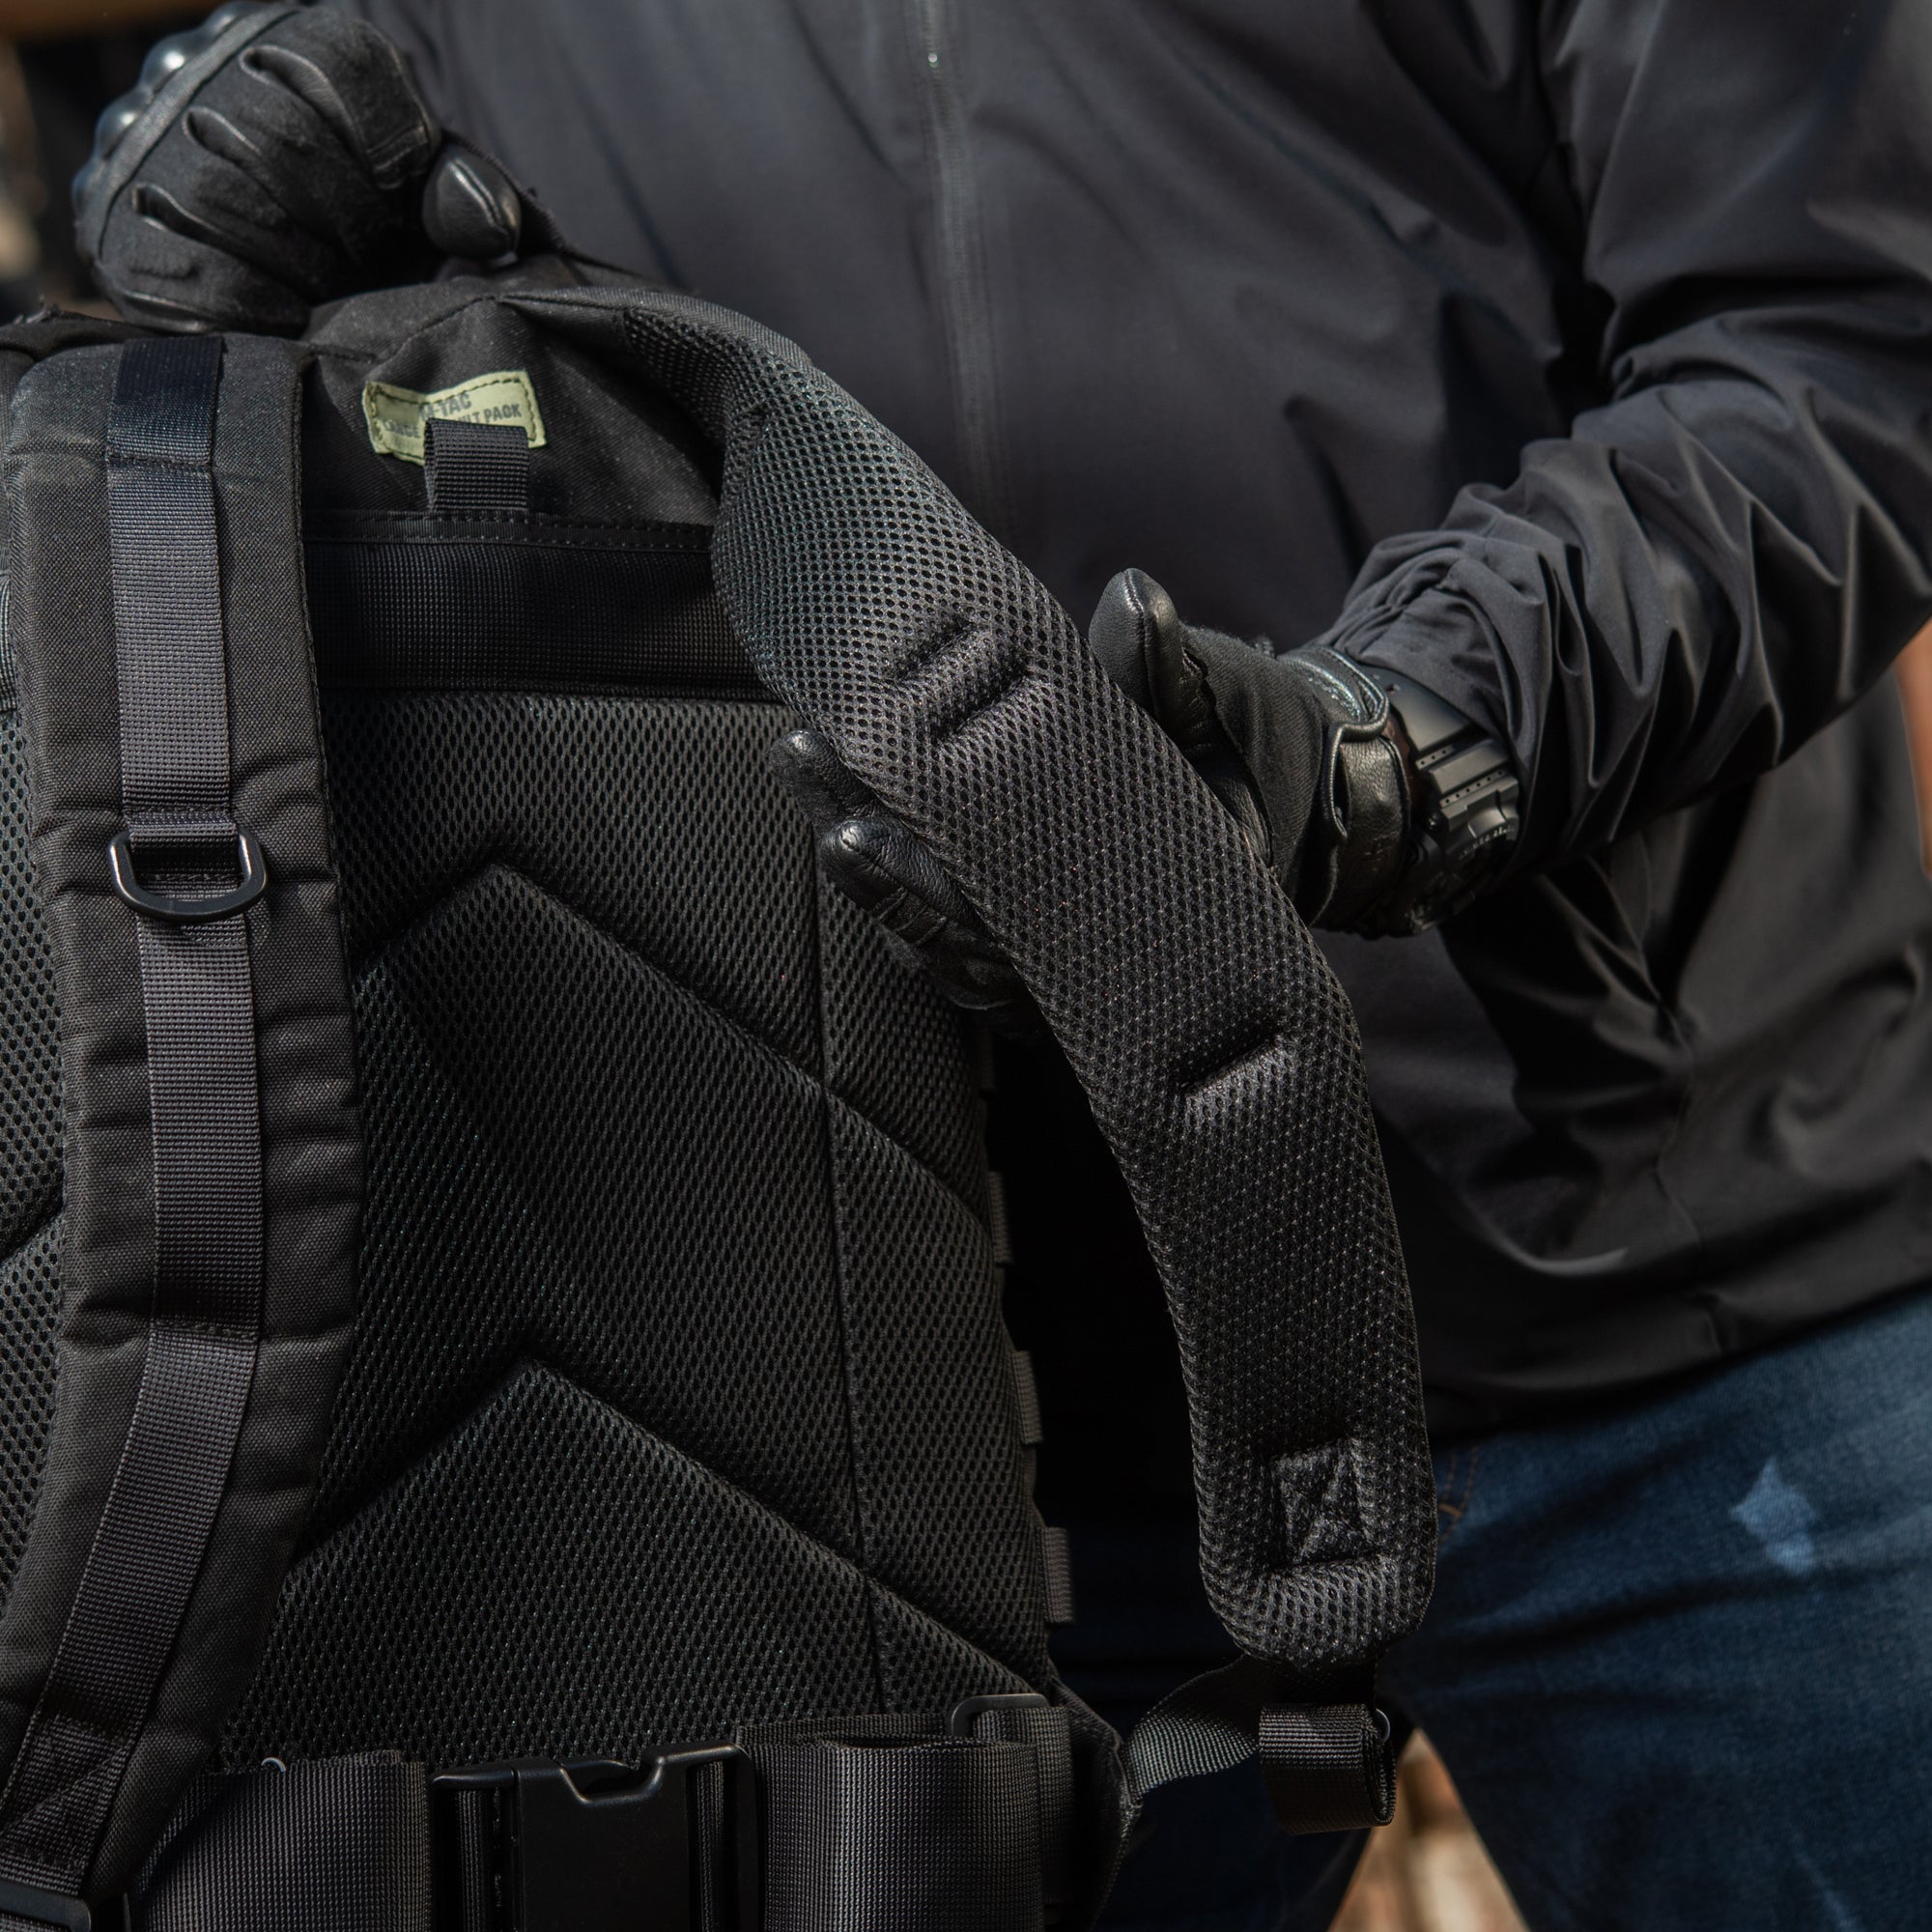 M-Tac Large Assault Pack with Molle Fastening System| M-TAC